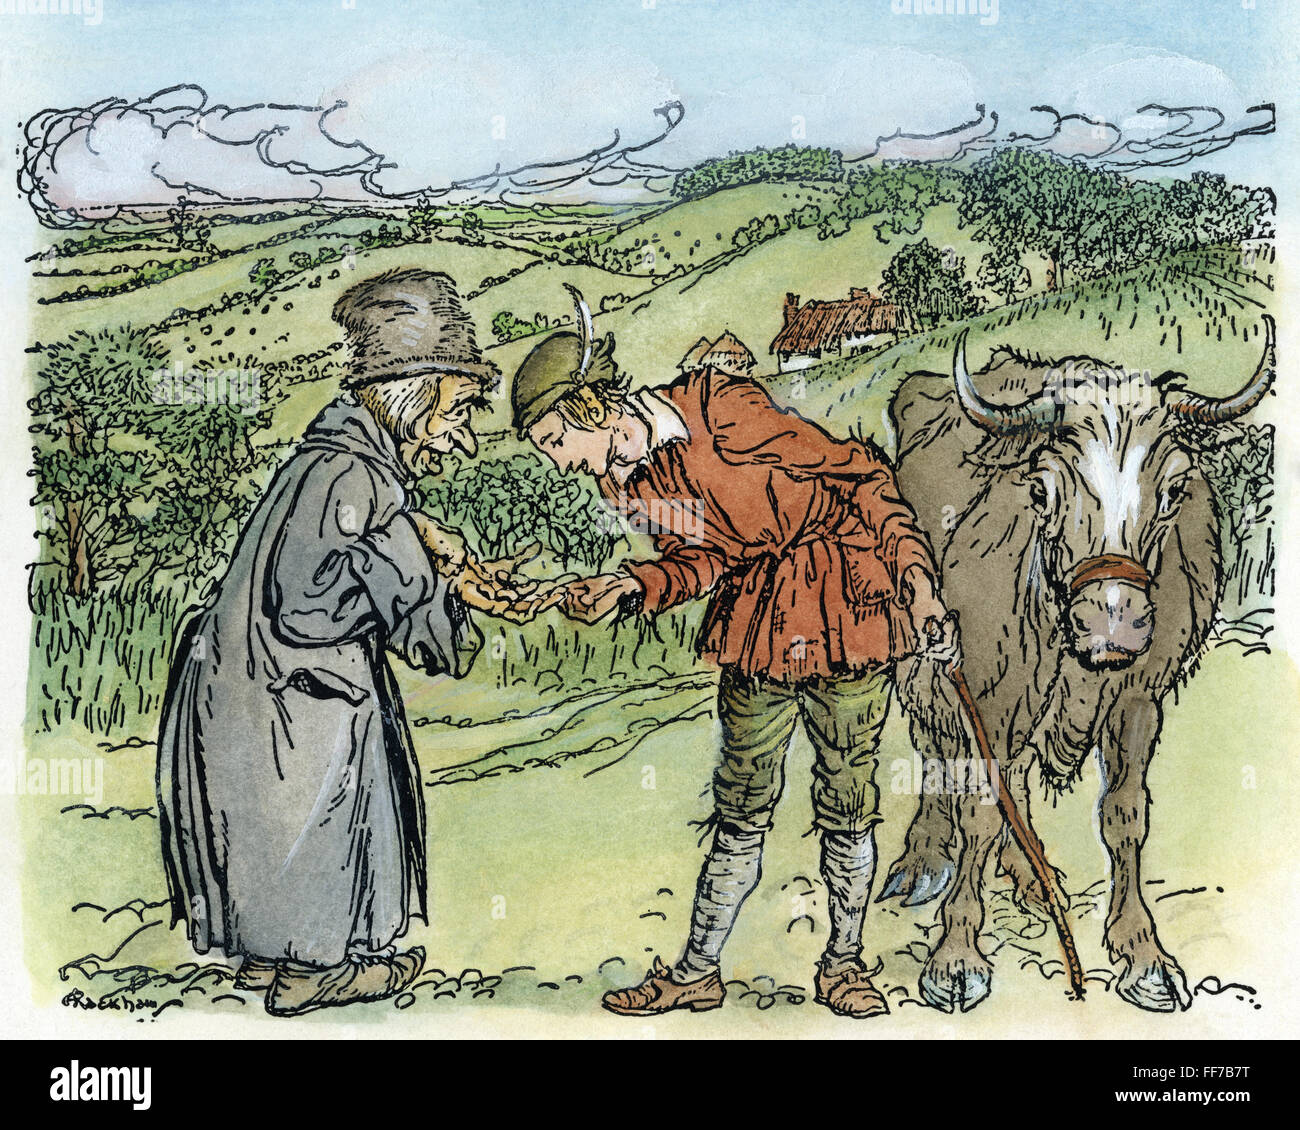 JACK AND THE BEANSTALK. /nJack trading his mother's cow for a handful of magic beans. Illustration by Arthur Rackham for a 1918 edition of the traditional English fairy tale. Stock Photo